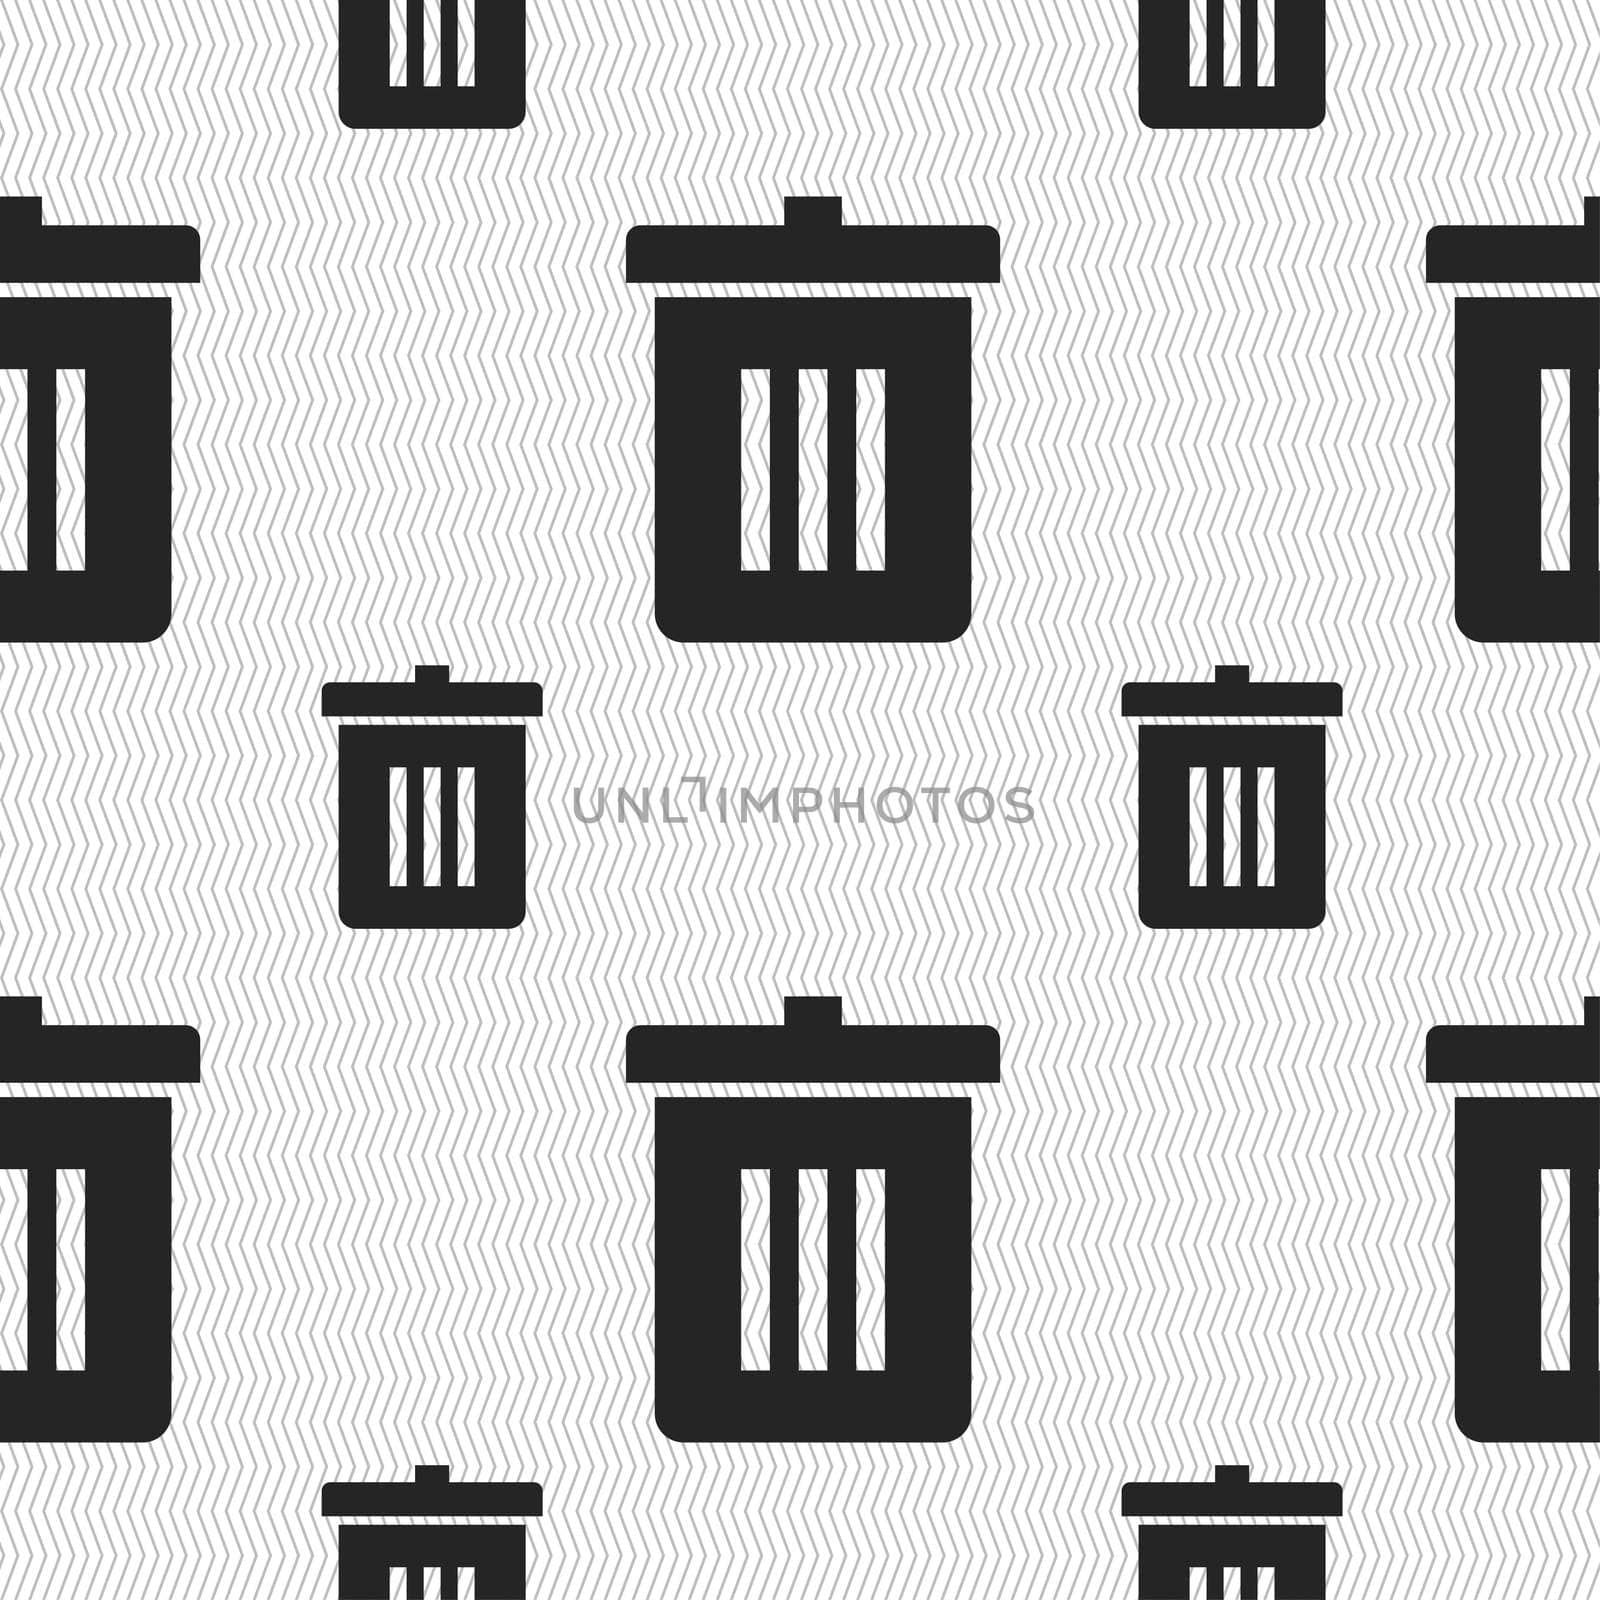 Recycle bin, Reuse or reduce icon sign. Seamless pattern with geometric texture. illustration